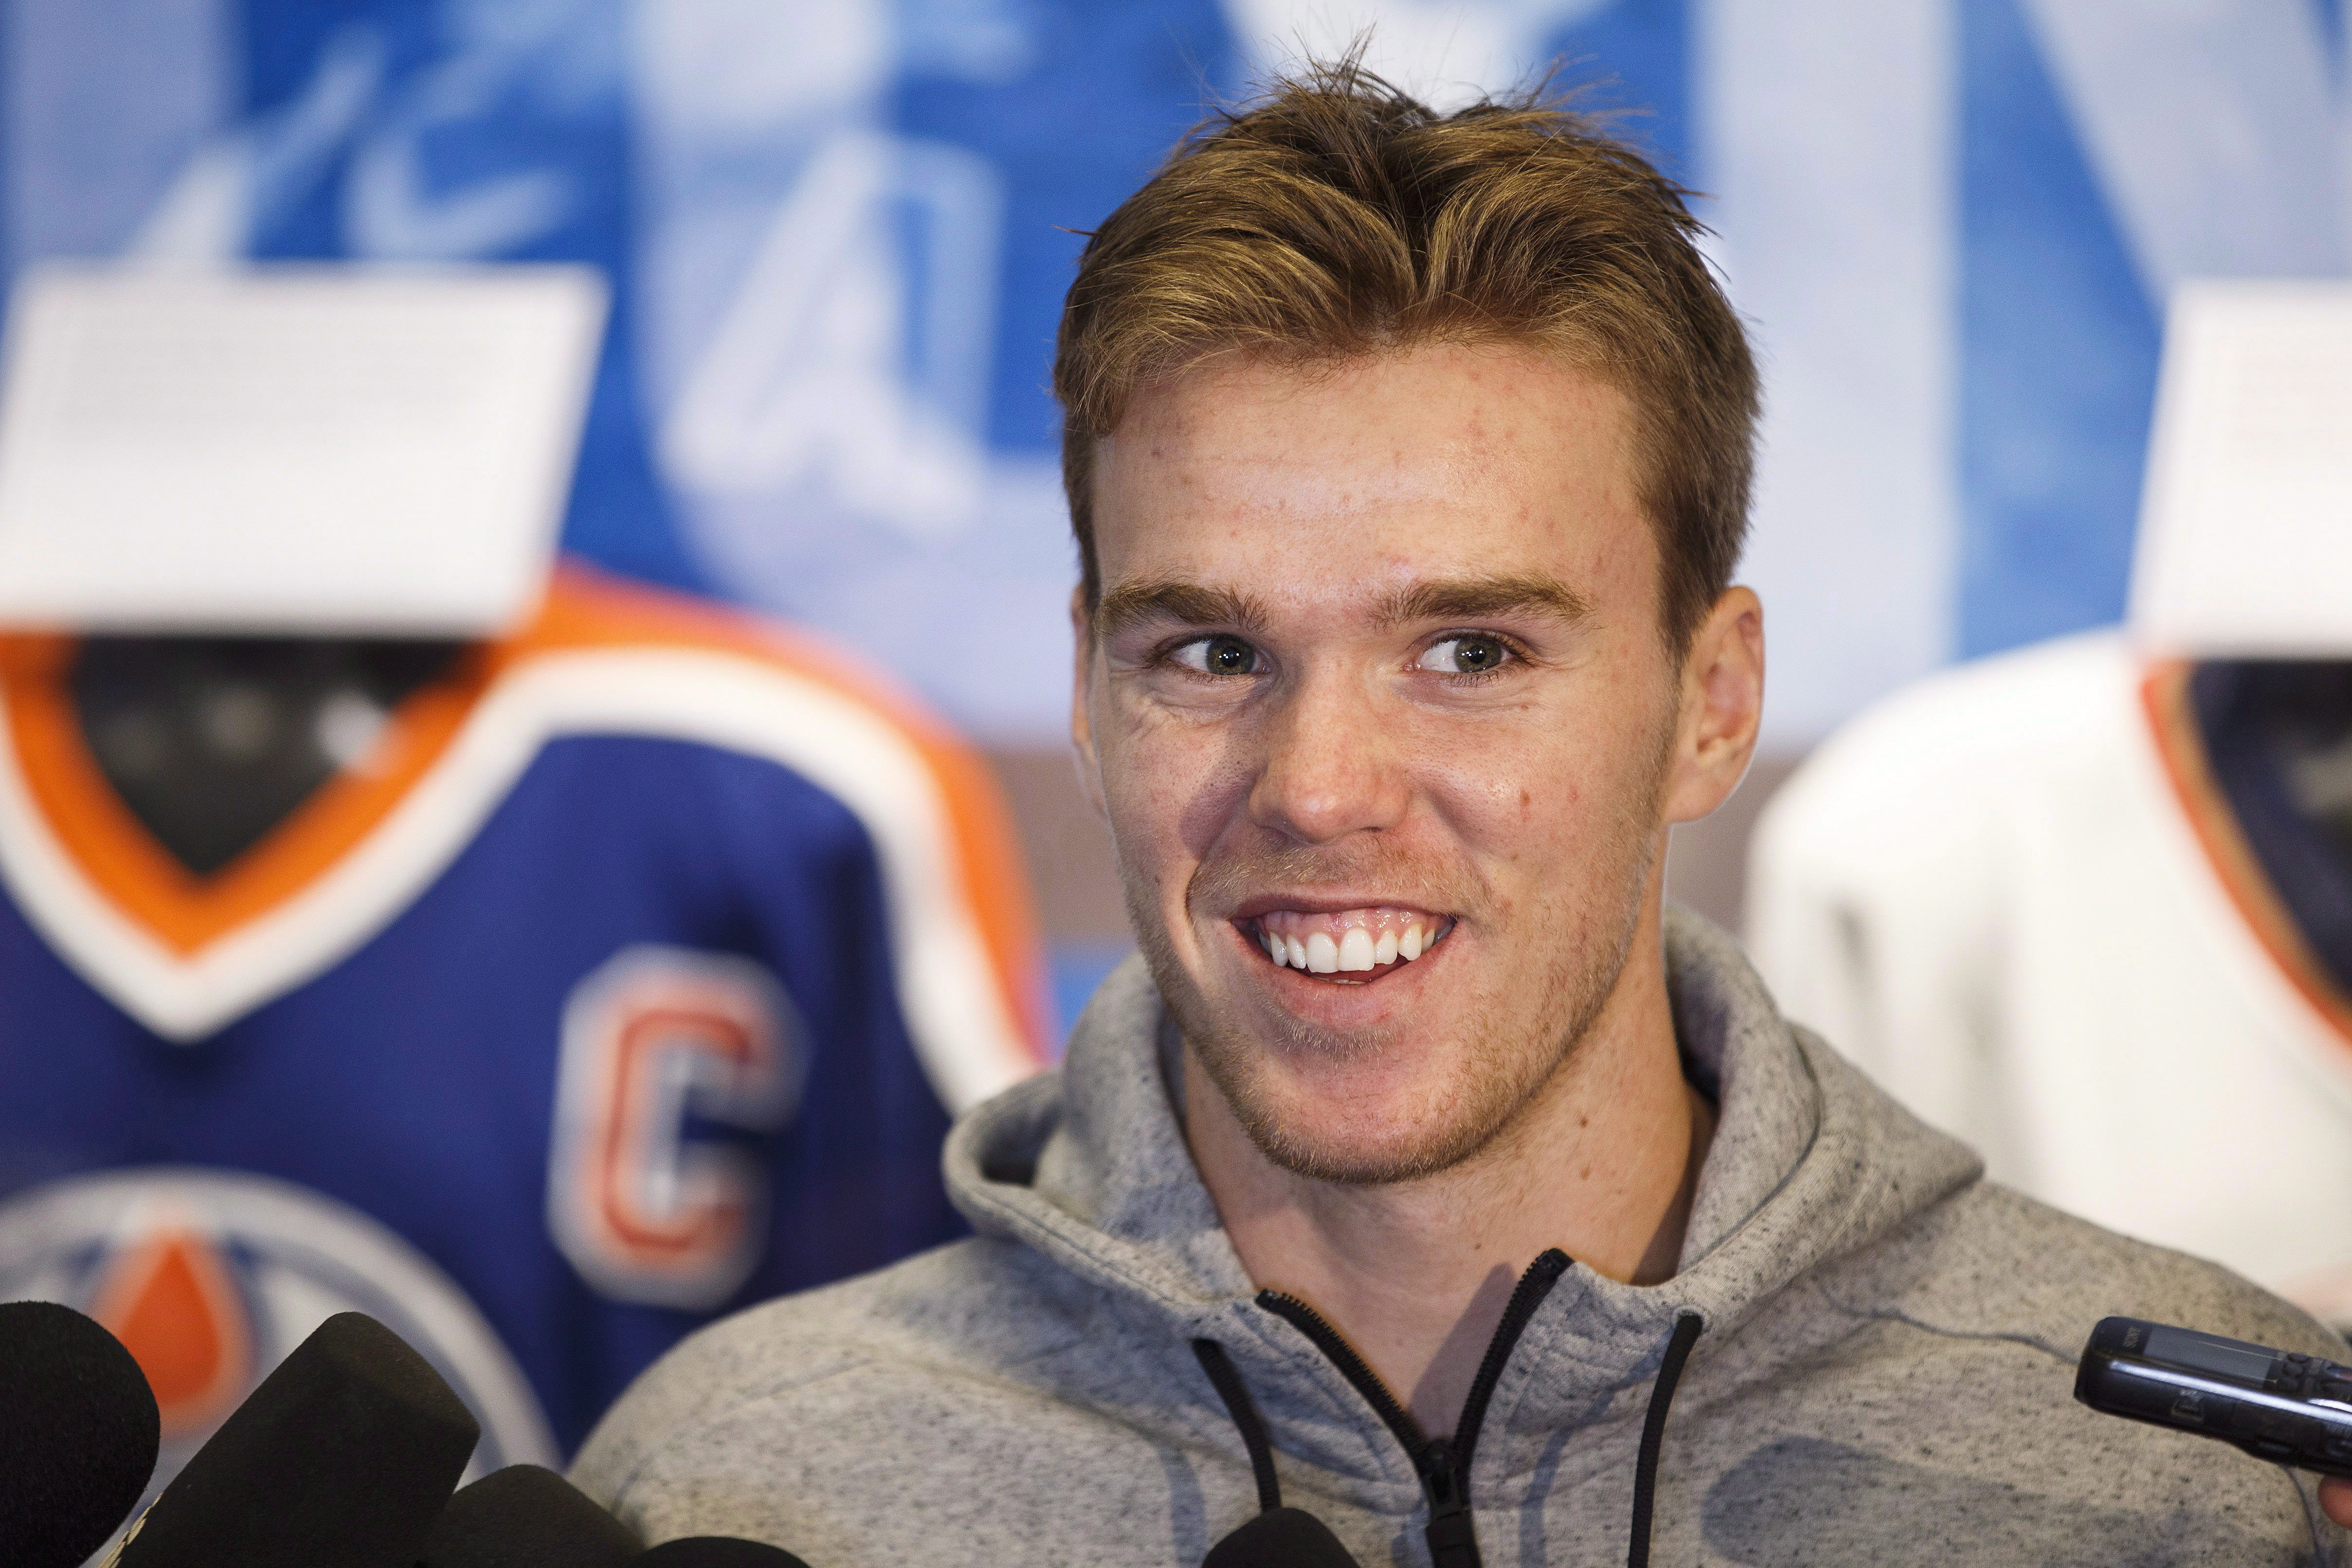 Connor McDavid told he wears wrong skate size by Boston pond rink